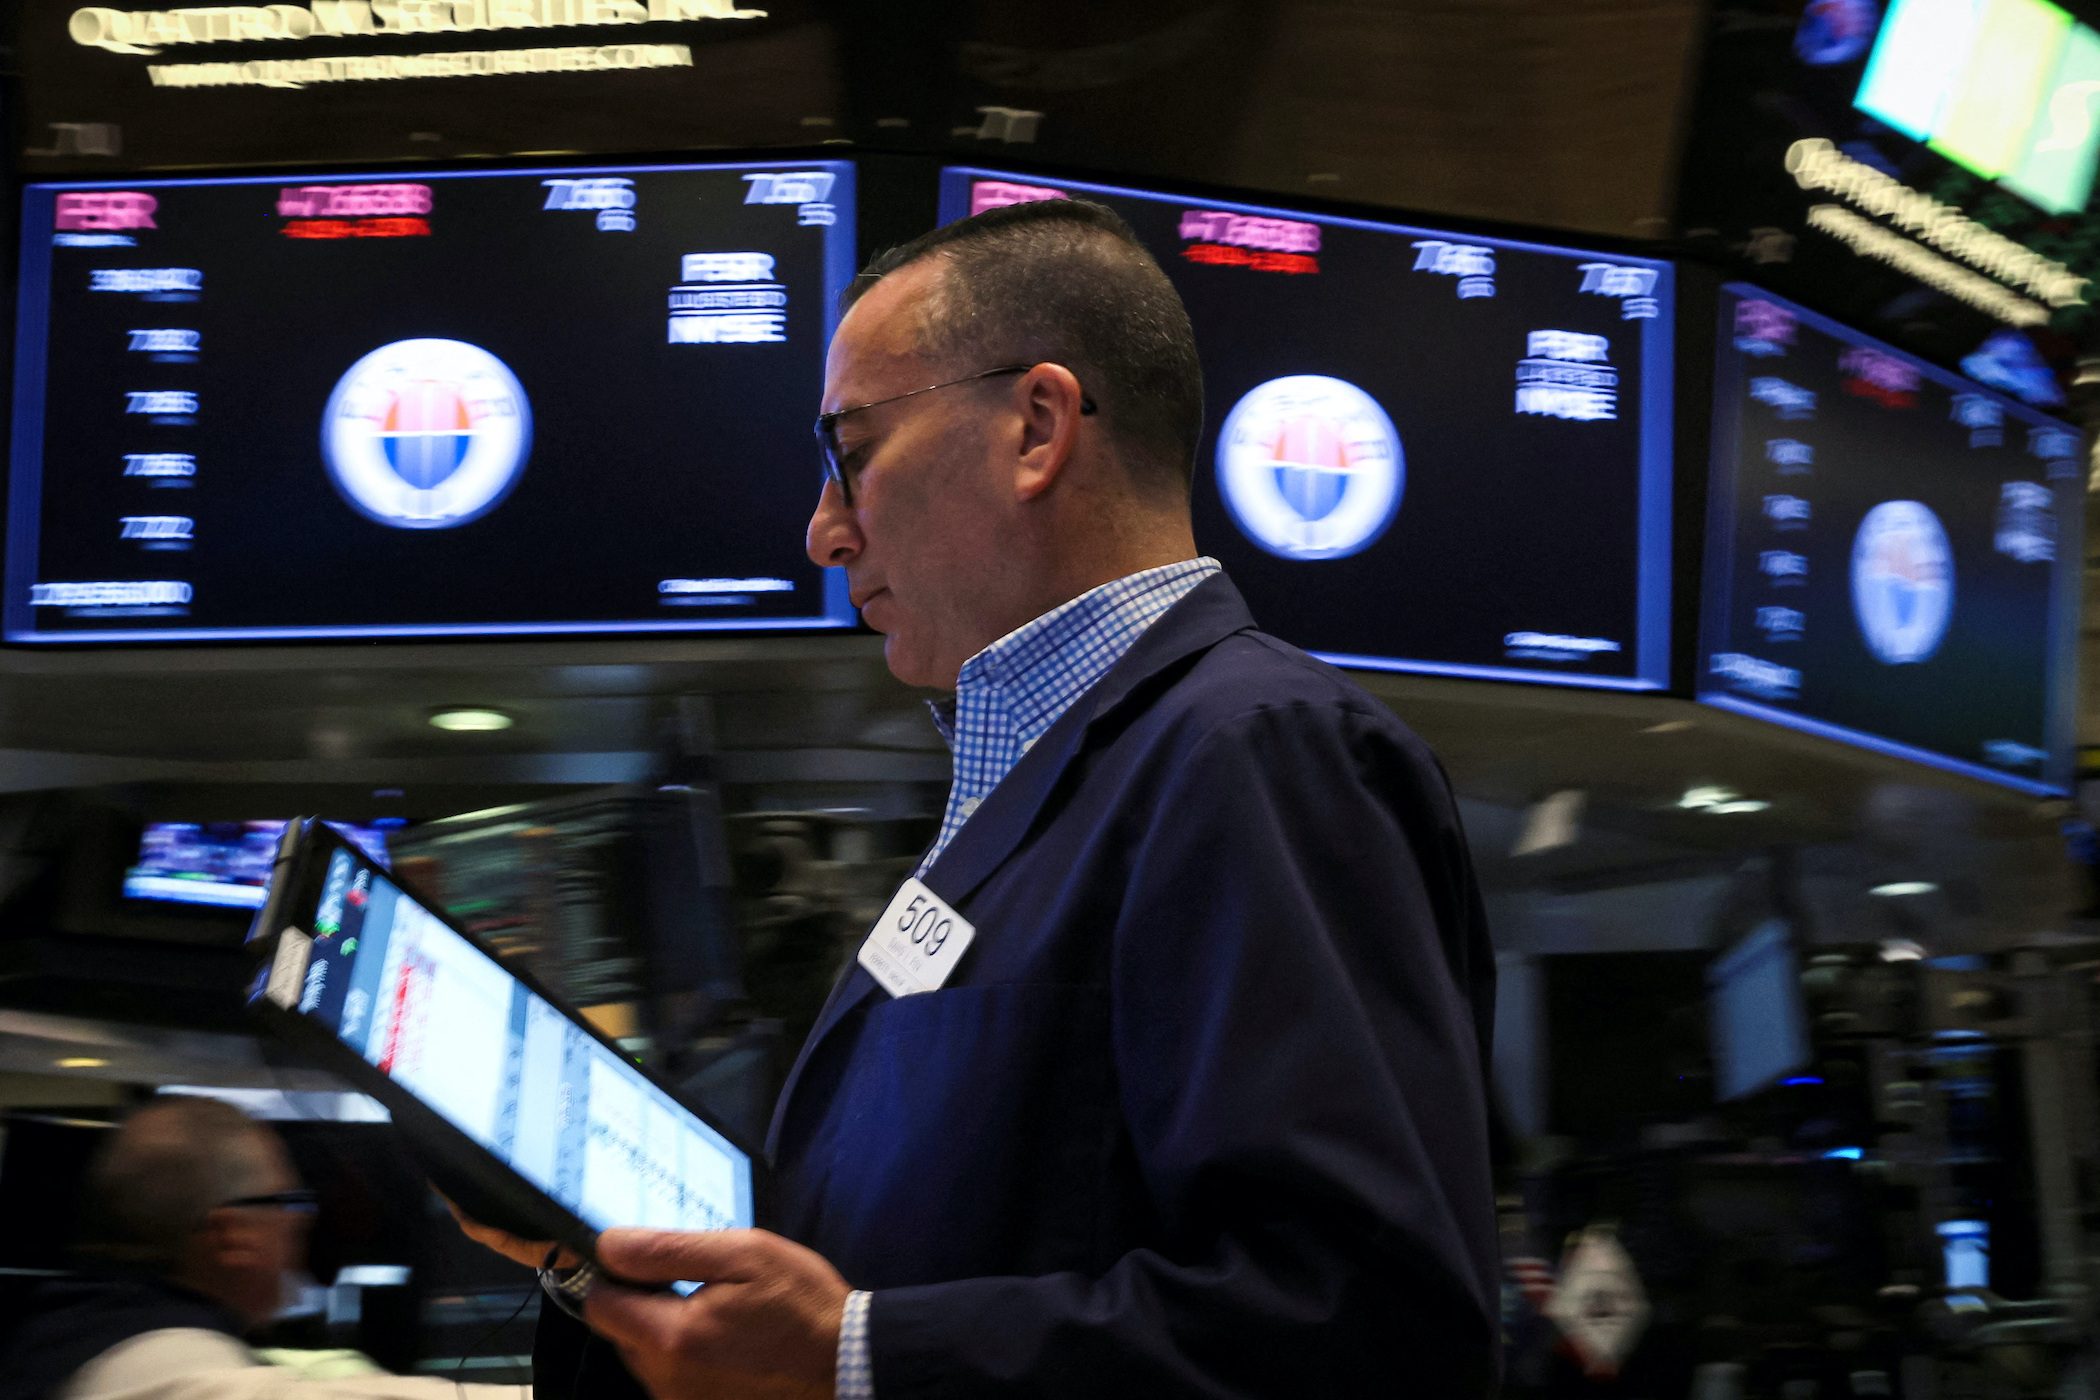 World shares rise, US Treasury yields fall ahead of Fed minutes